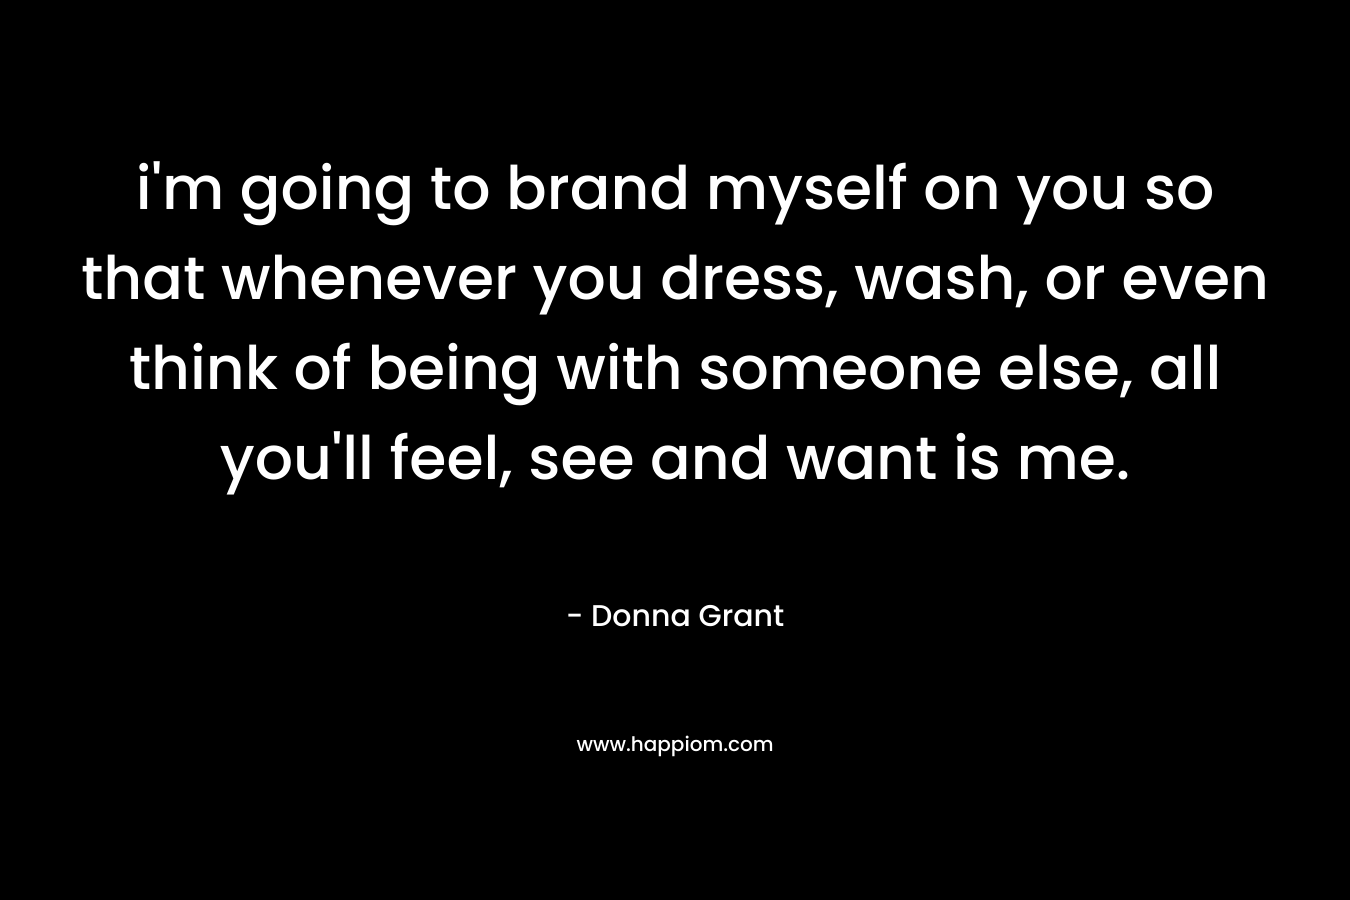 i’m going to brand myself on you so that whenever you dress, wash, or even think of being with someone else, all you’ll feel, see and want is me. – Donna Grant